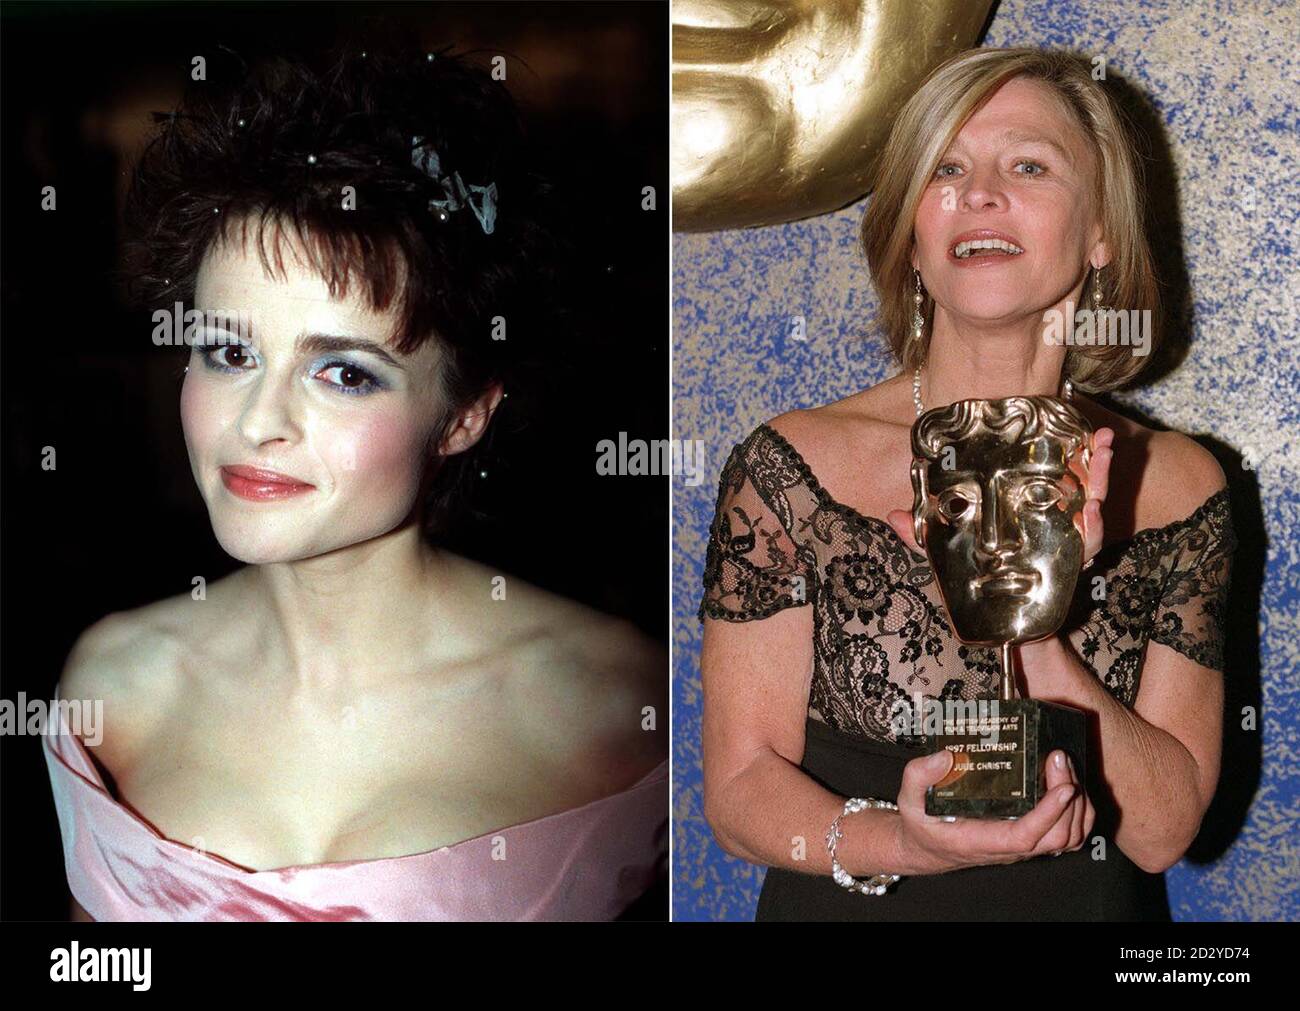 Library file composite: Left, dated 12/11/97; Actress Helena Bonham Carter attends the premiere of Iaina Softley's, The Wings Of The Dove. Right, dated 29/4/97; Julie Christie accepts a Fellowship BAFTA award at the Royal Albert Hall: The pair are among four British actresses who received nominations for best actress at this year's Oscars awards ceremony, on March 23. See PA story SHOWBIZ Oscars./PAPhotos by Fiona Hanson/PA. Stock Photo